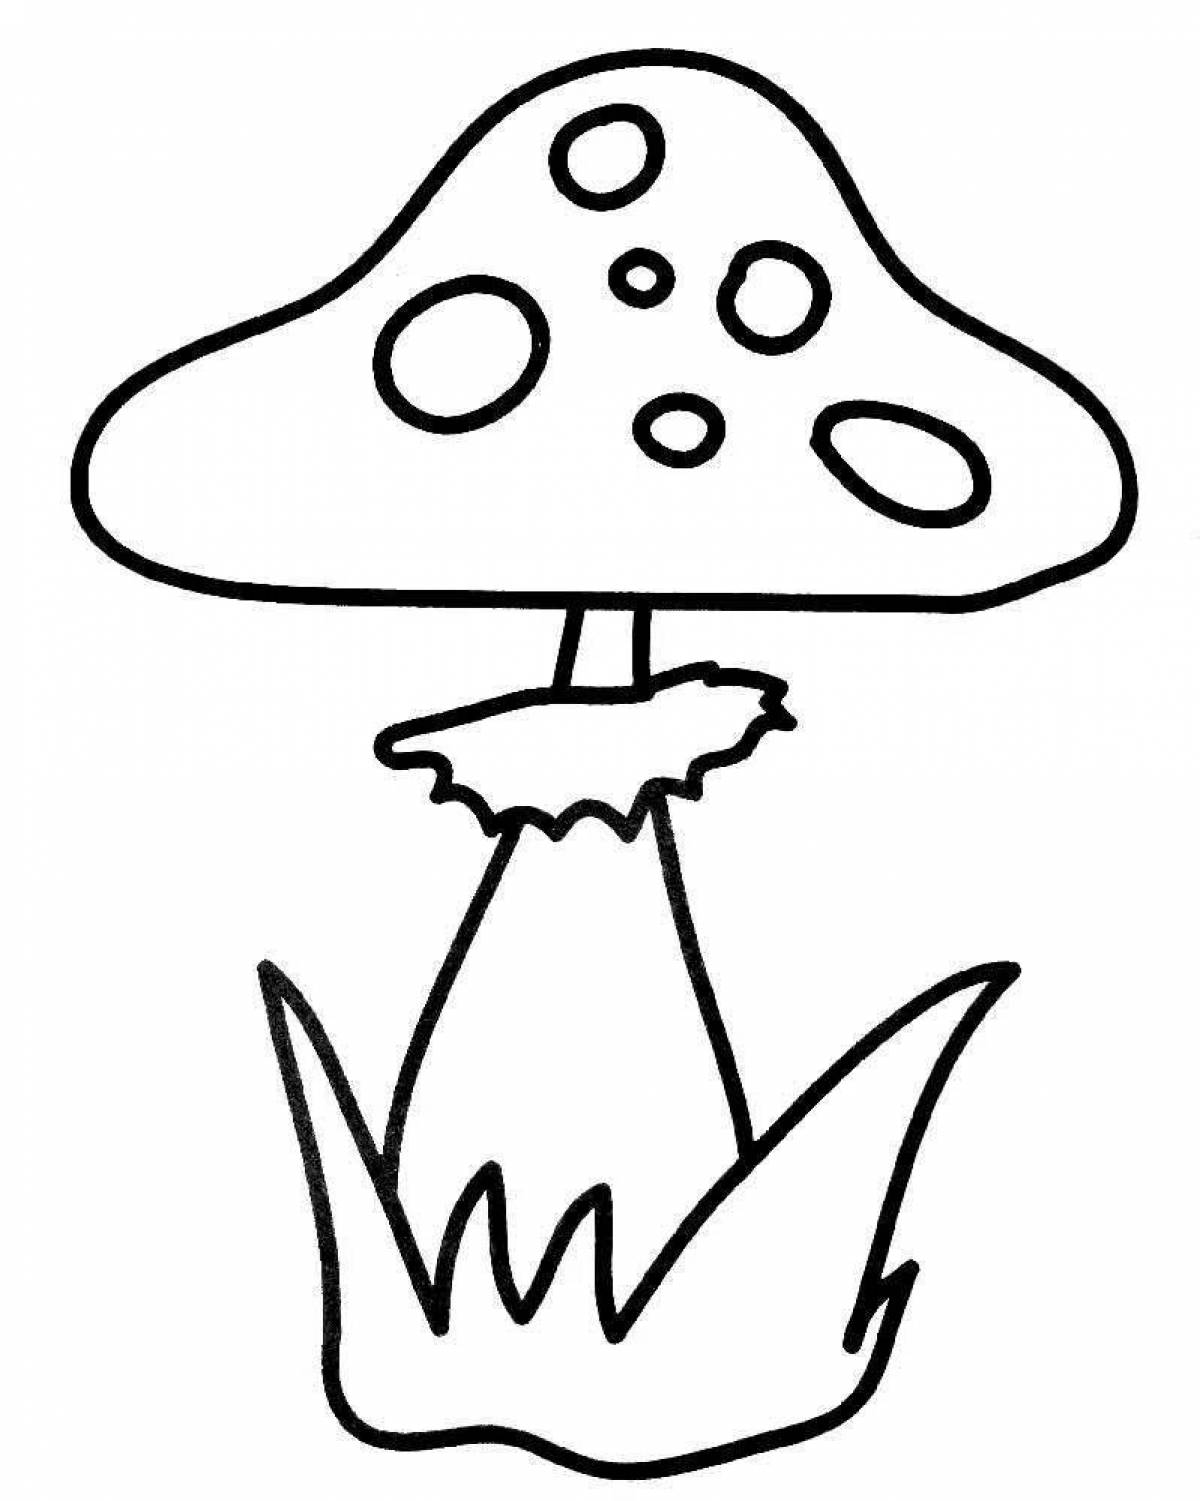 Playful mushroom coloring book for 3-4 year olds